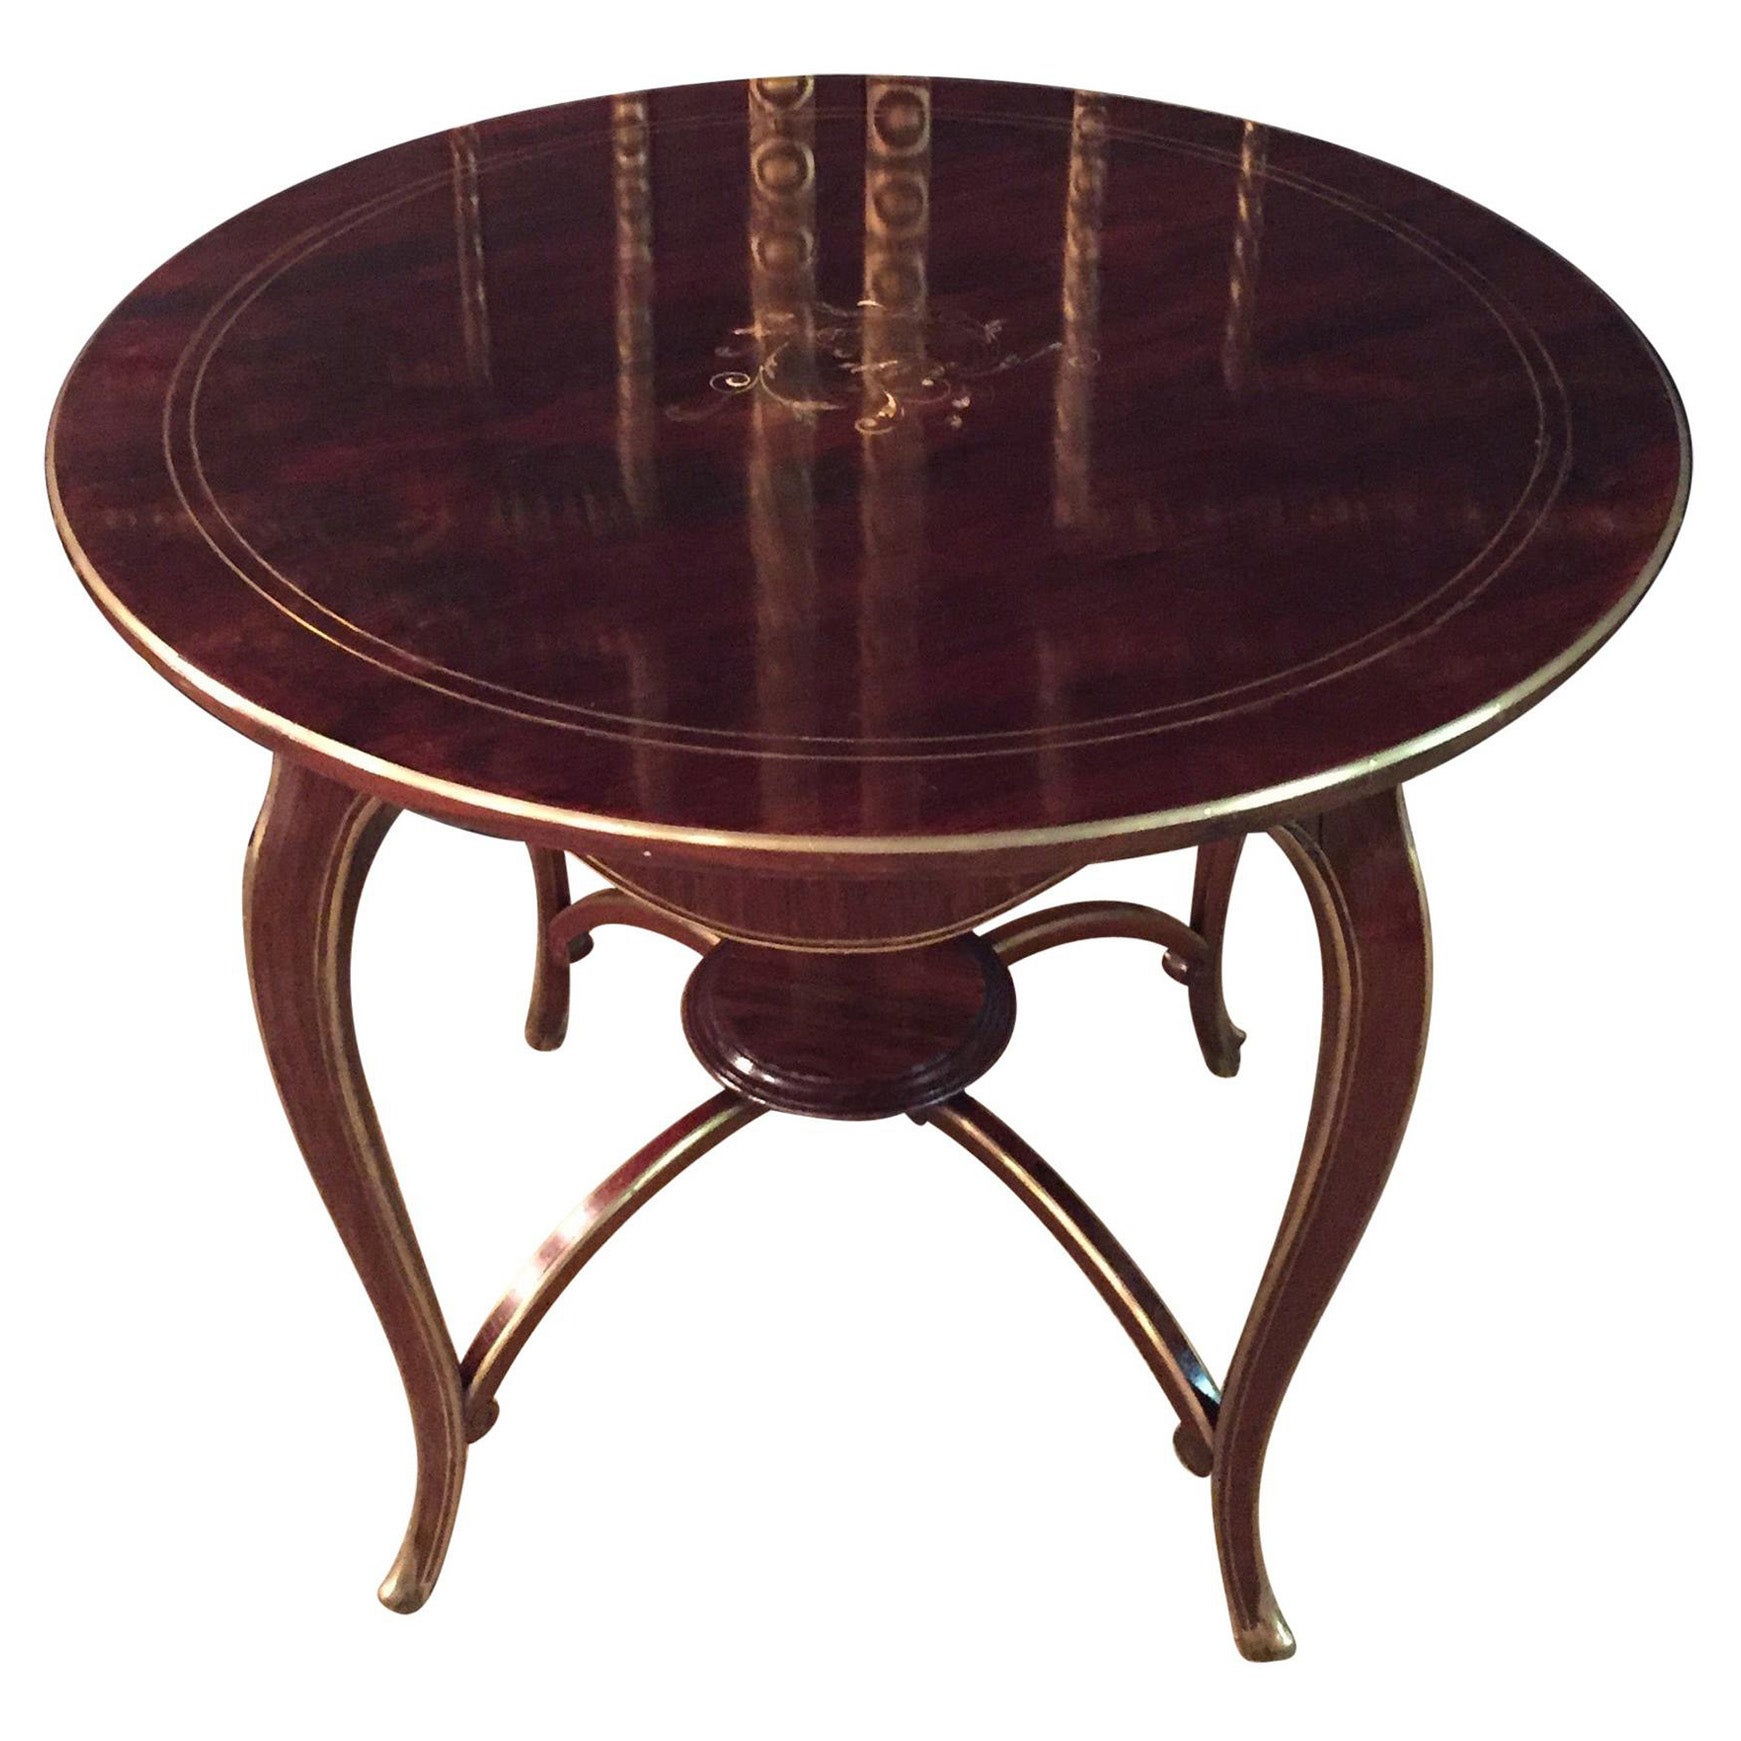 Antique Biedermeier Table Mahogany Inlaid with Mother of Pearl inlay 1870 For Sale